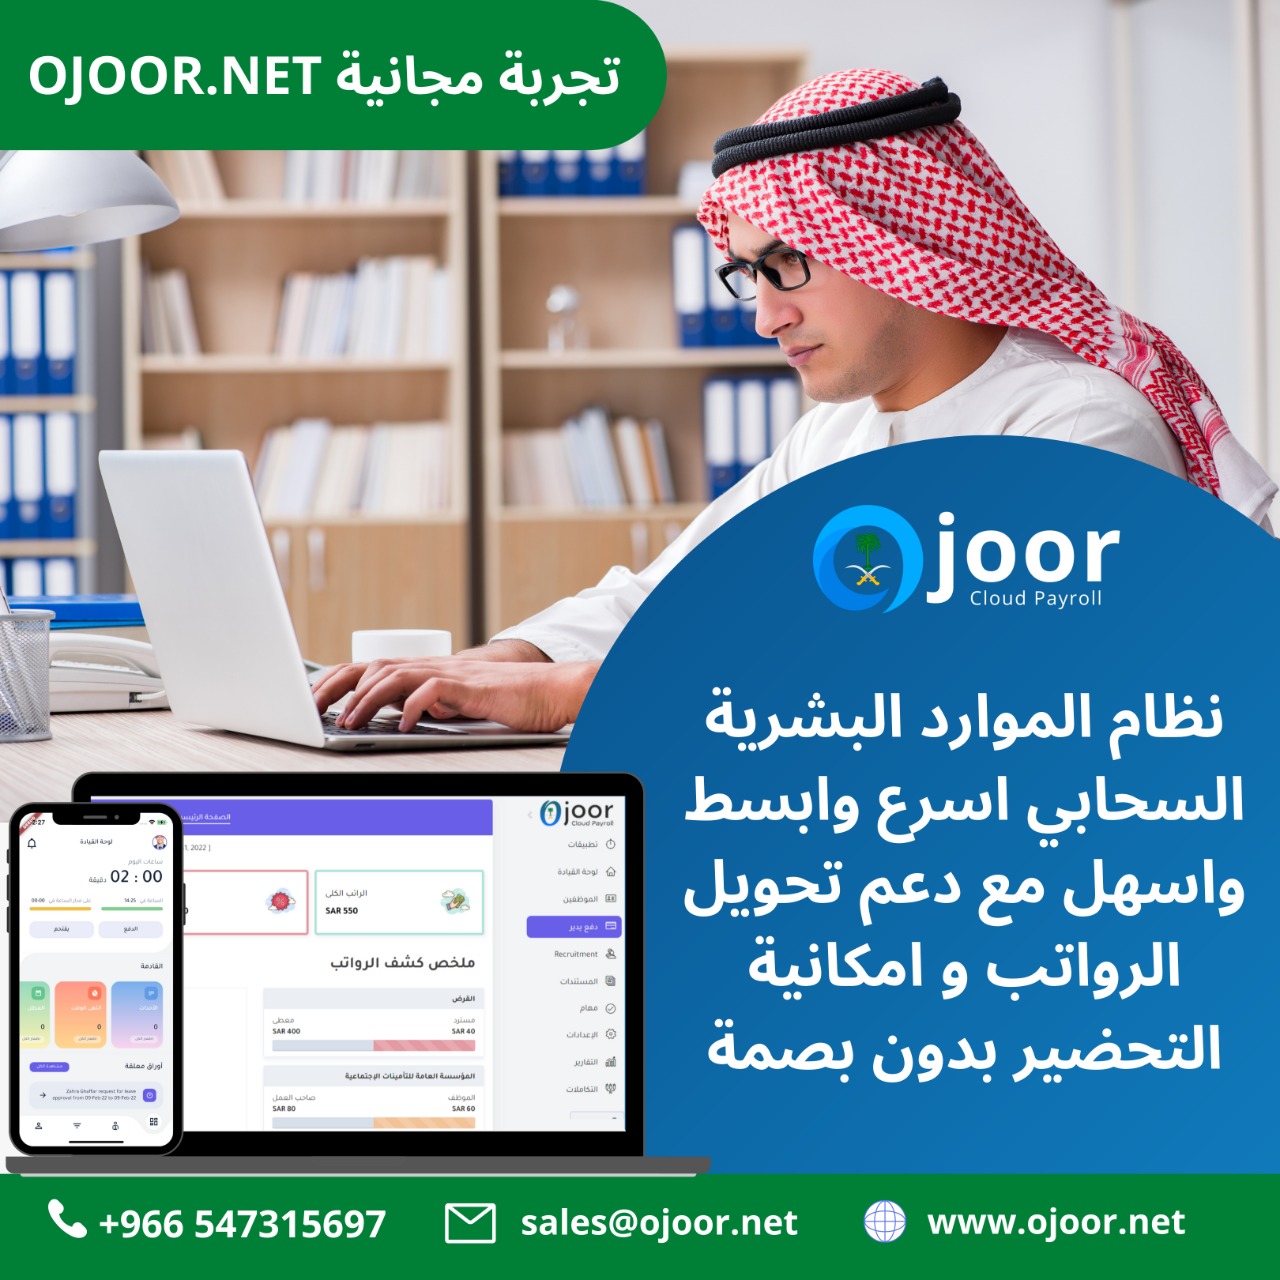 How To Improve Business Productivity With Payroll System in Saudi?